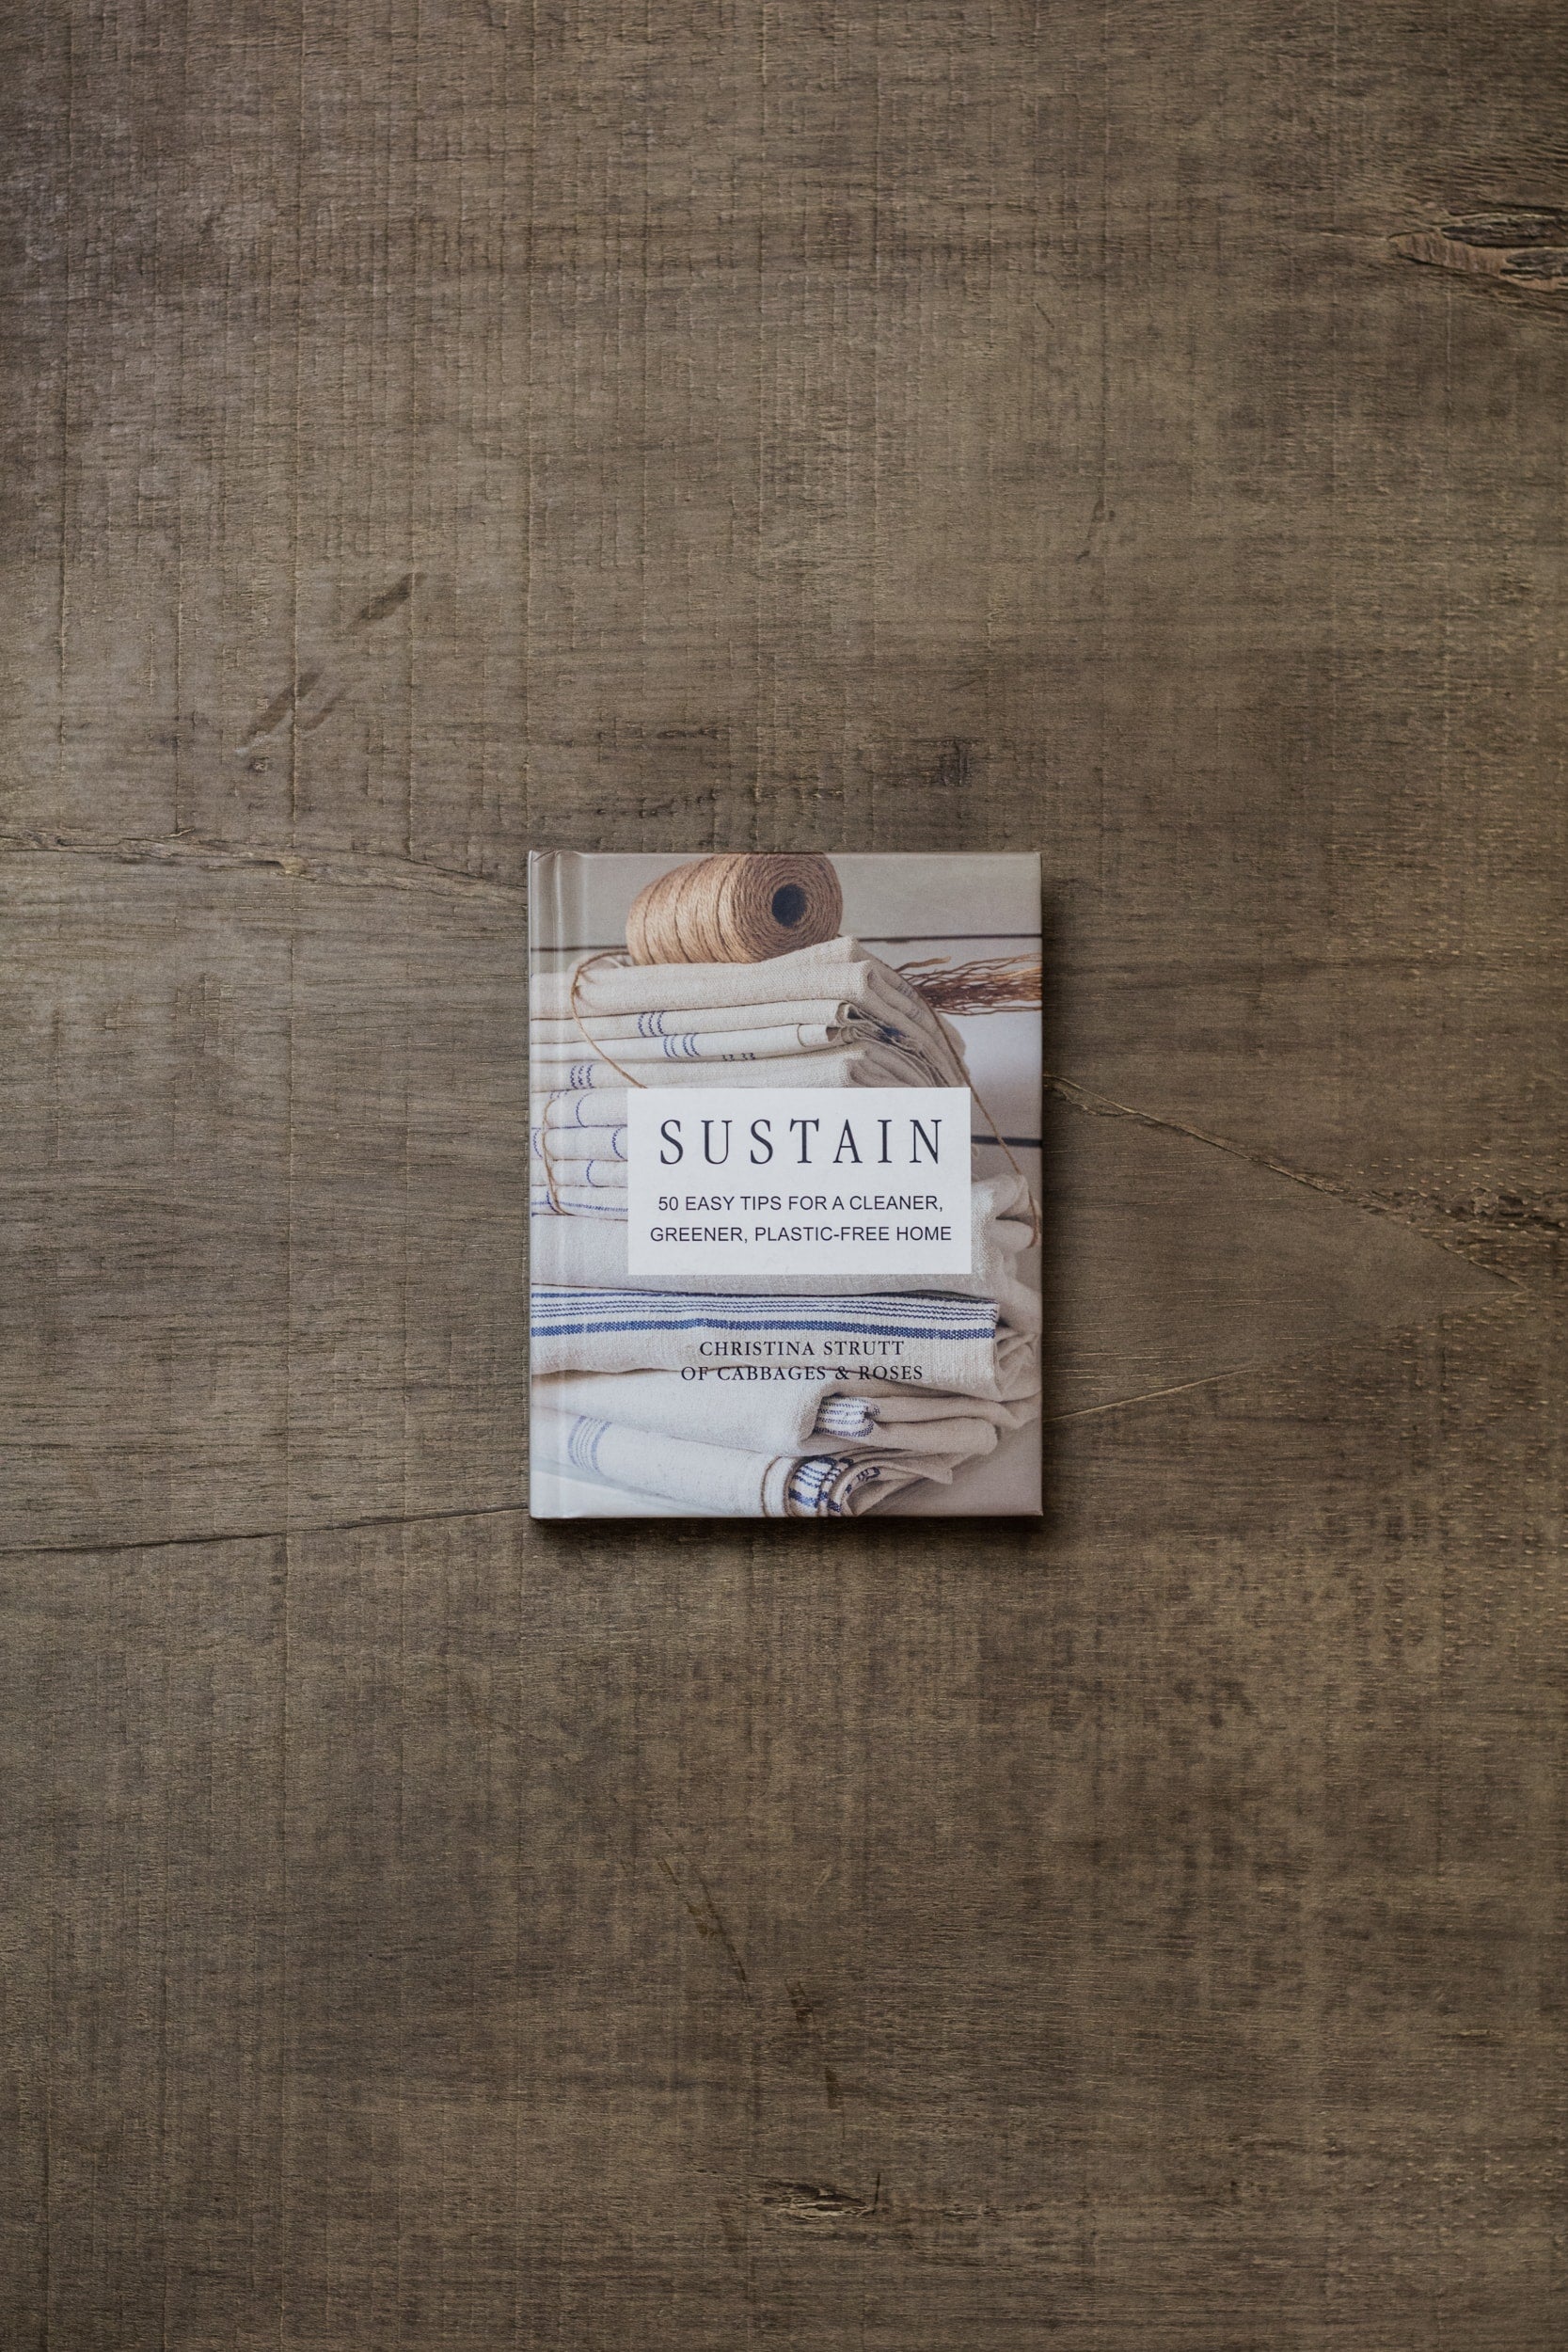 Sustain: 50 Easy Tips for a Cleaner, Greener, Plastic-Free Home